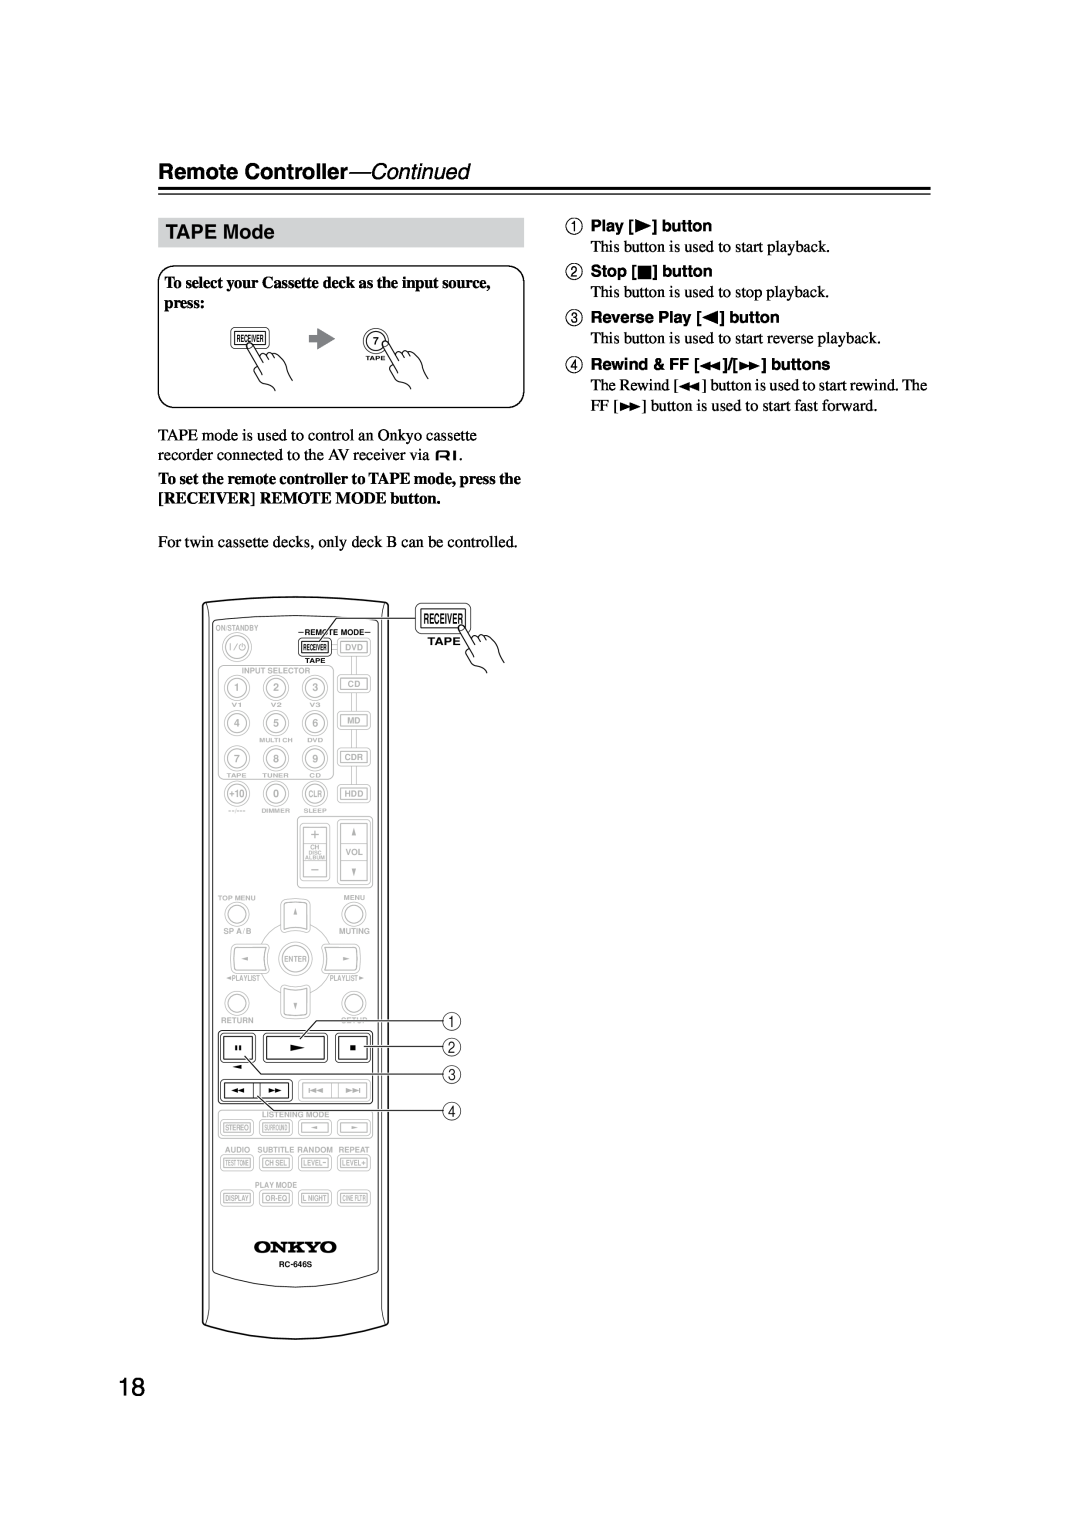 Onkyo HT-S590 instruction manual TAPE Mode, Remote Controller-Continued 